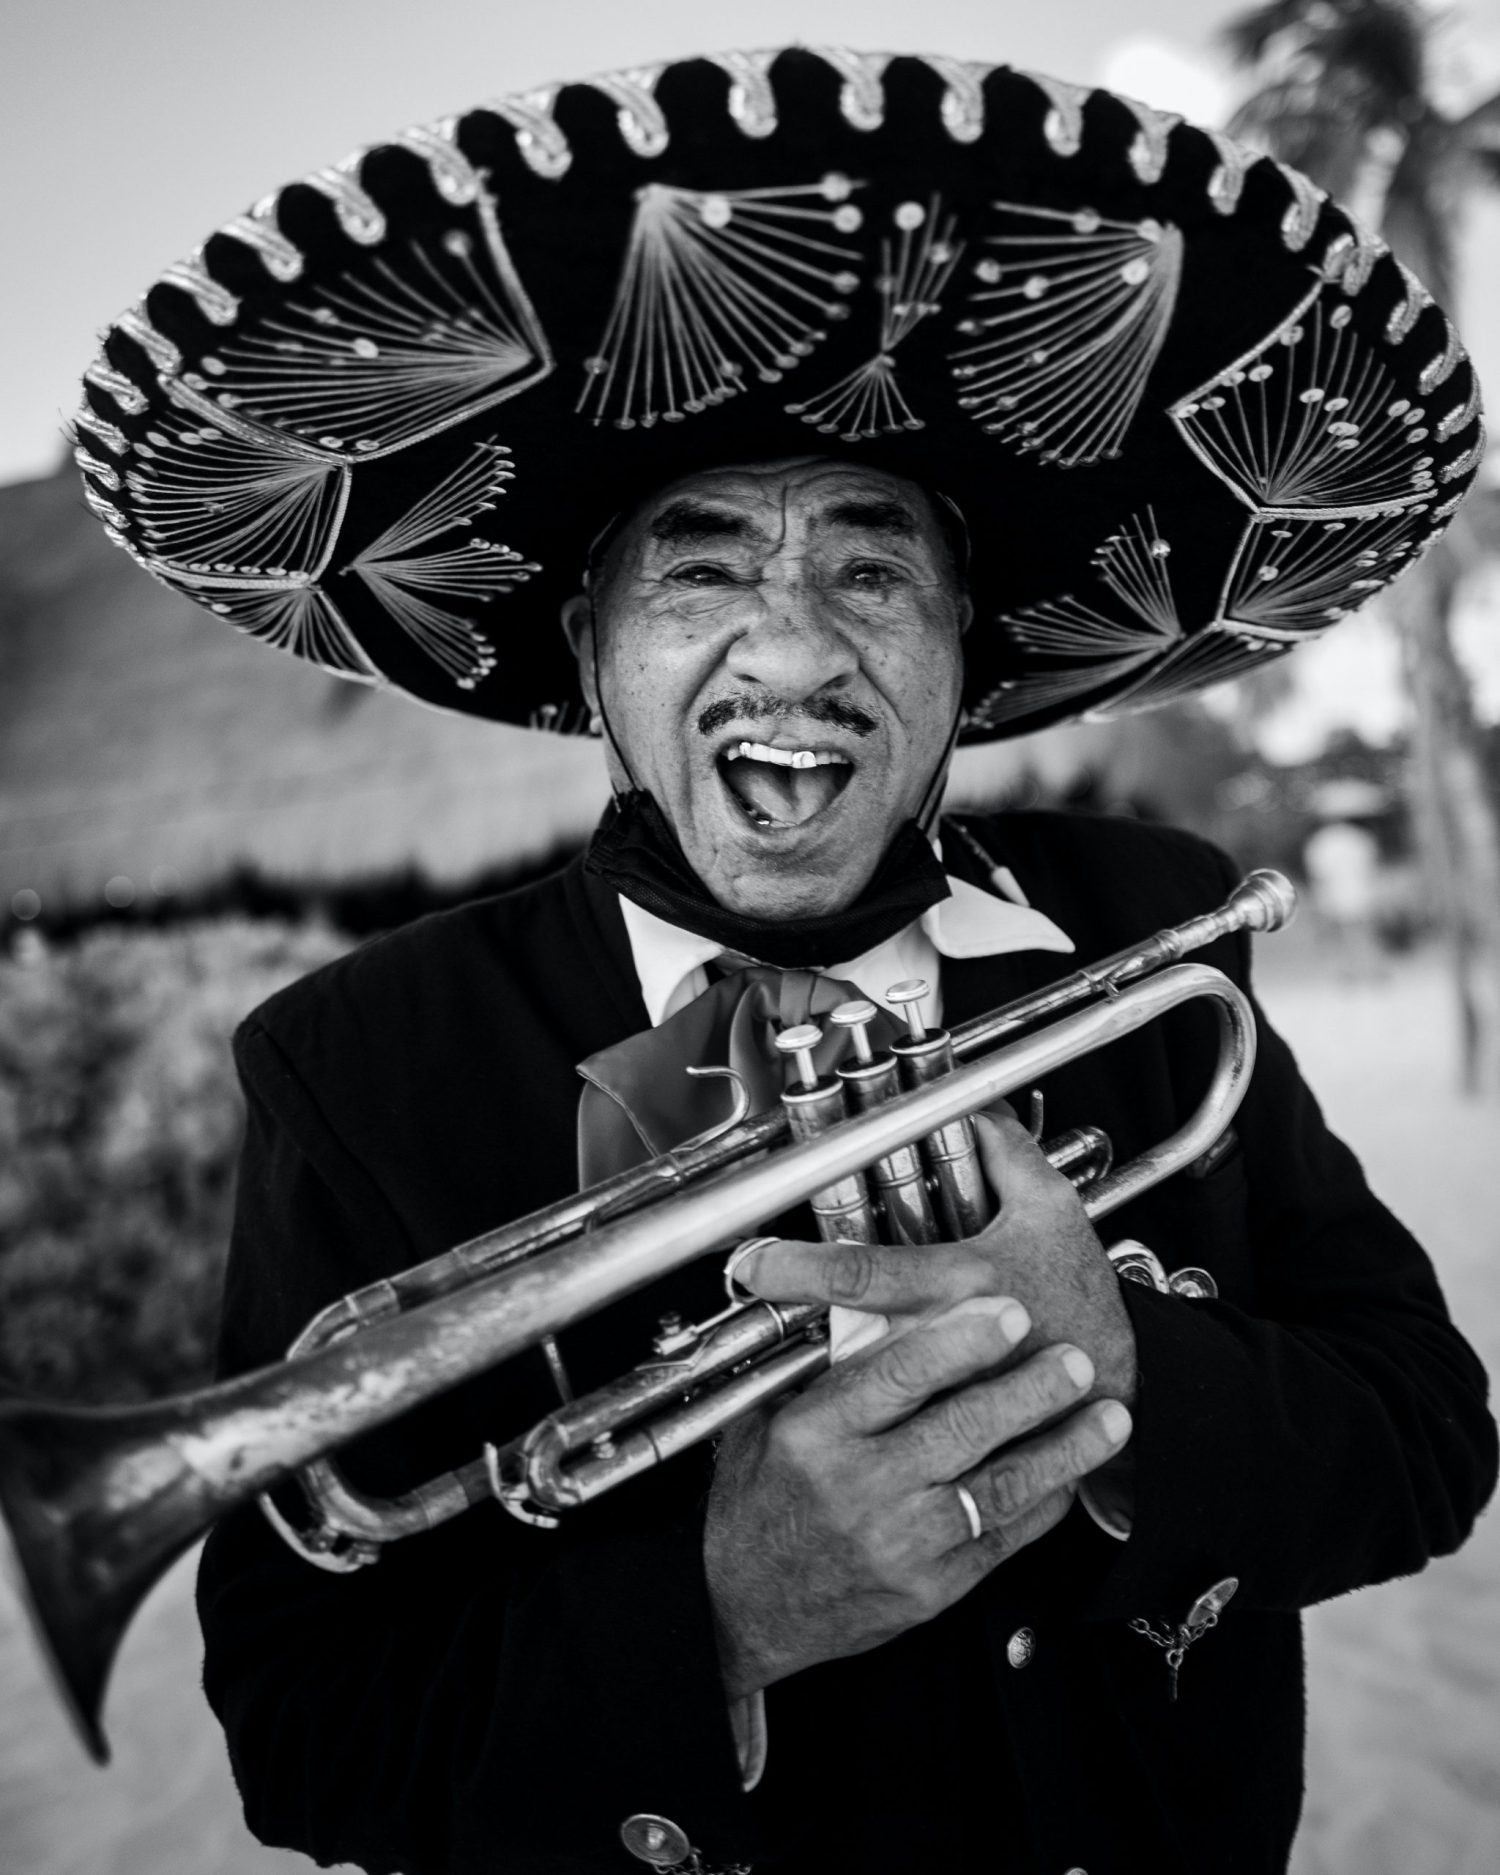 Mariachi Songs for Dad - Mariachis